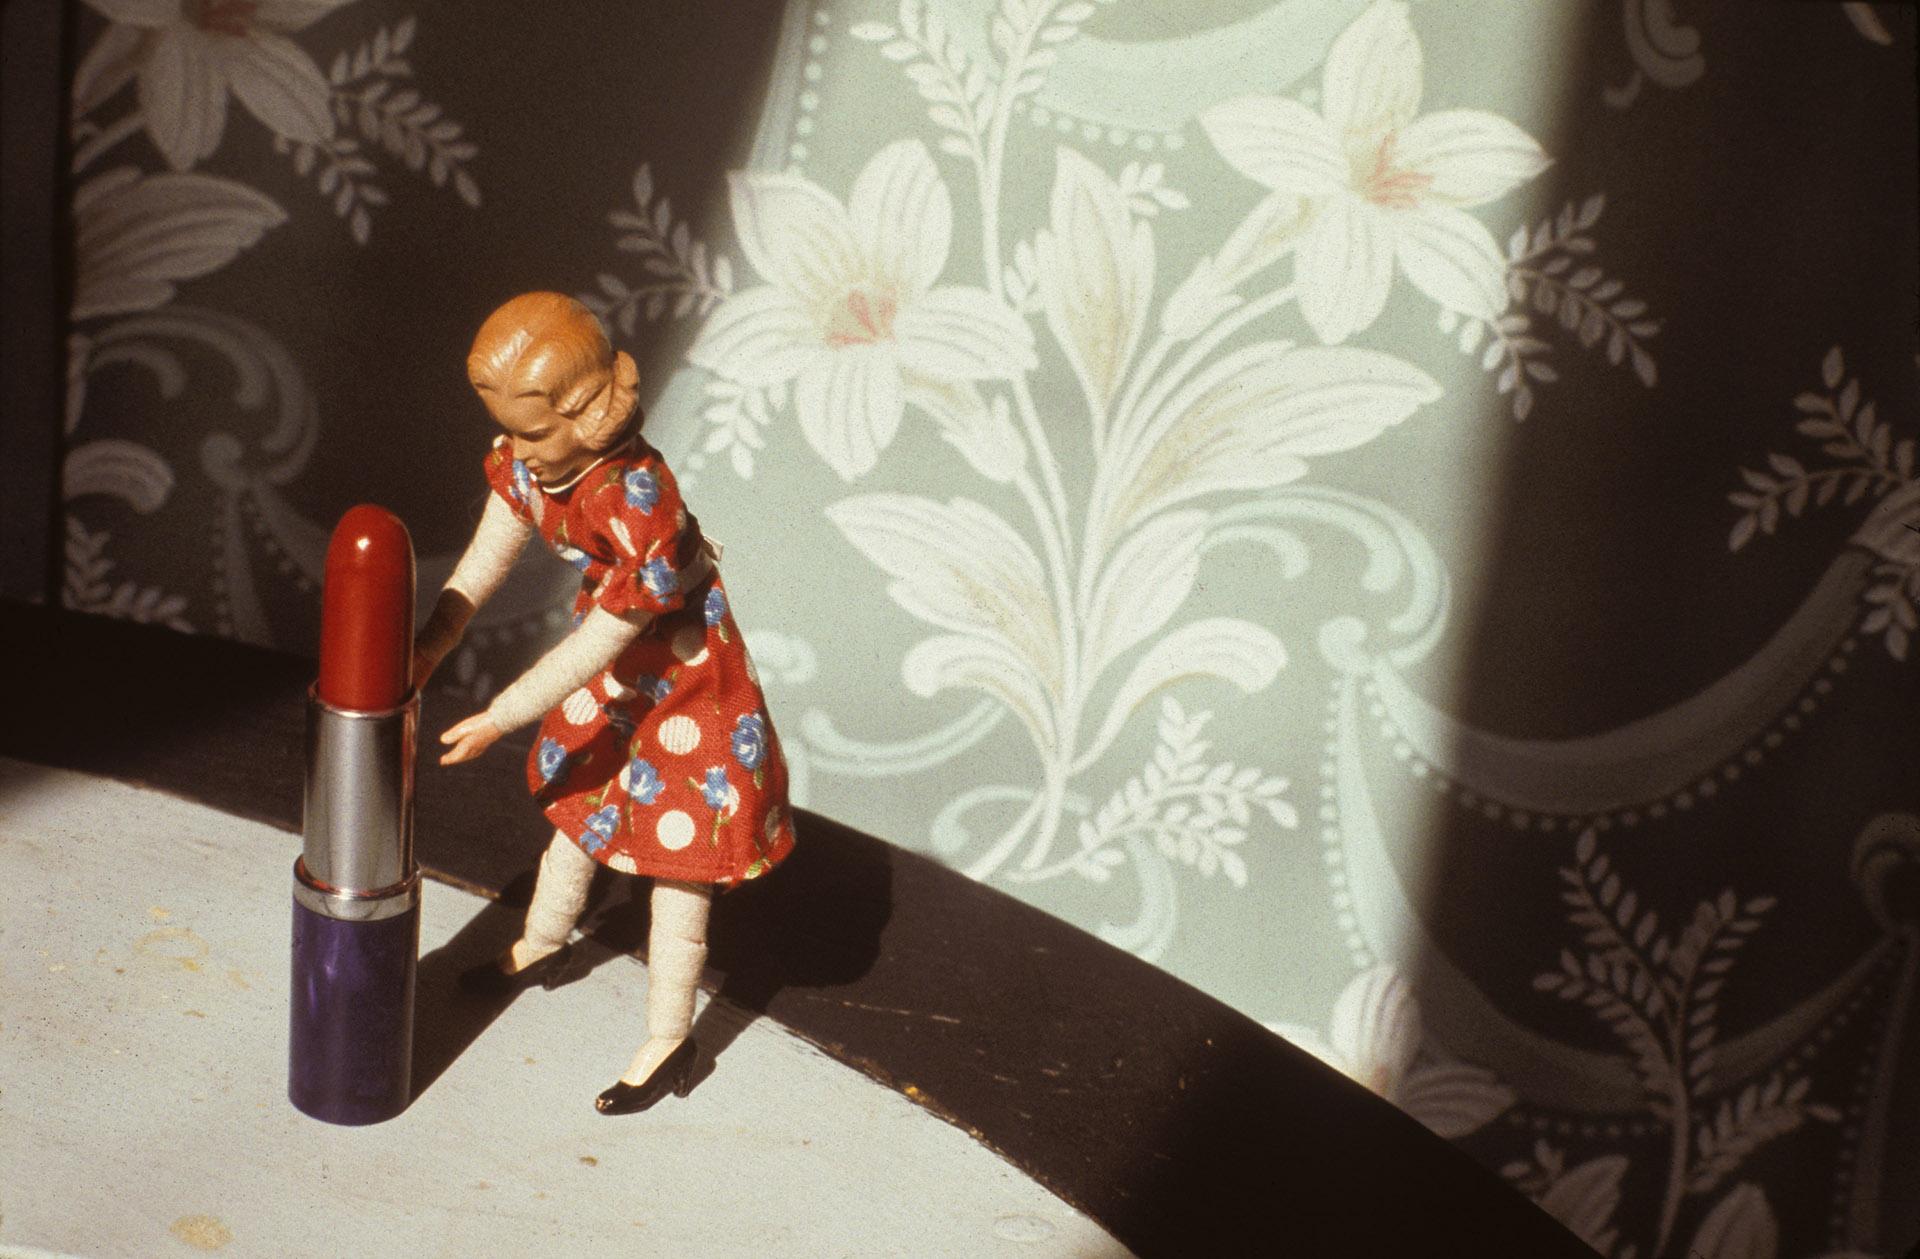 Laurie Simmons, Pushing Lipstick (Spotlight), 1979. Photo: © Laurie Simmons, courtesy of the artist and Salon 94.